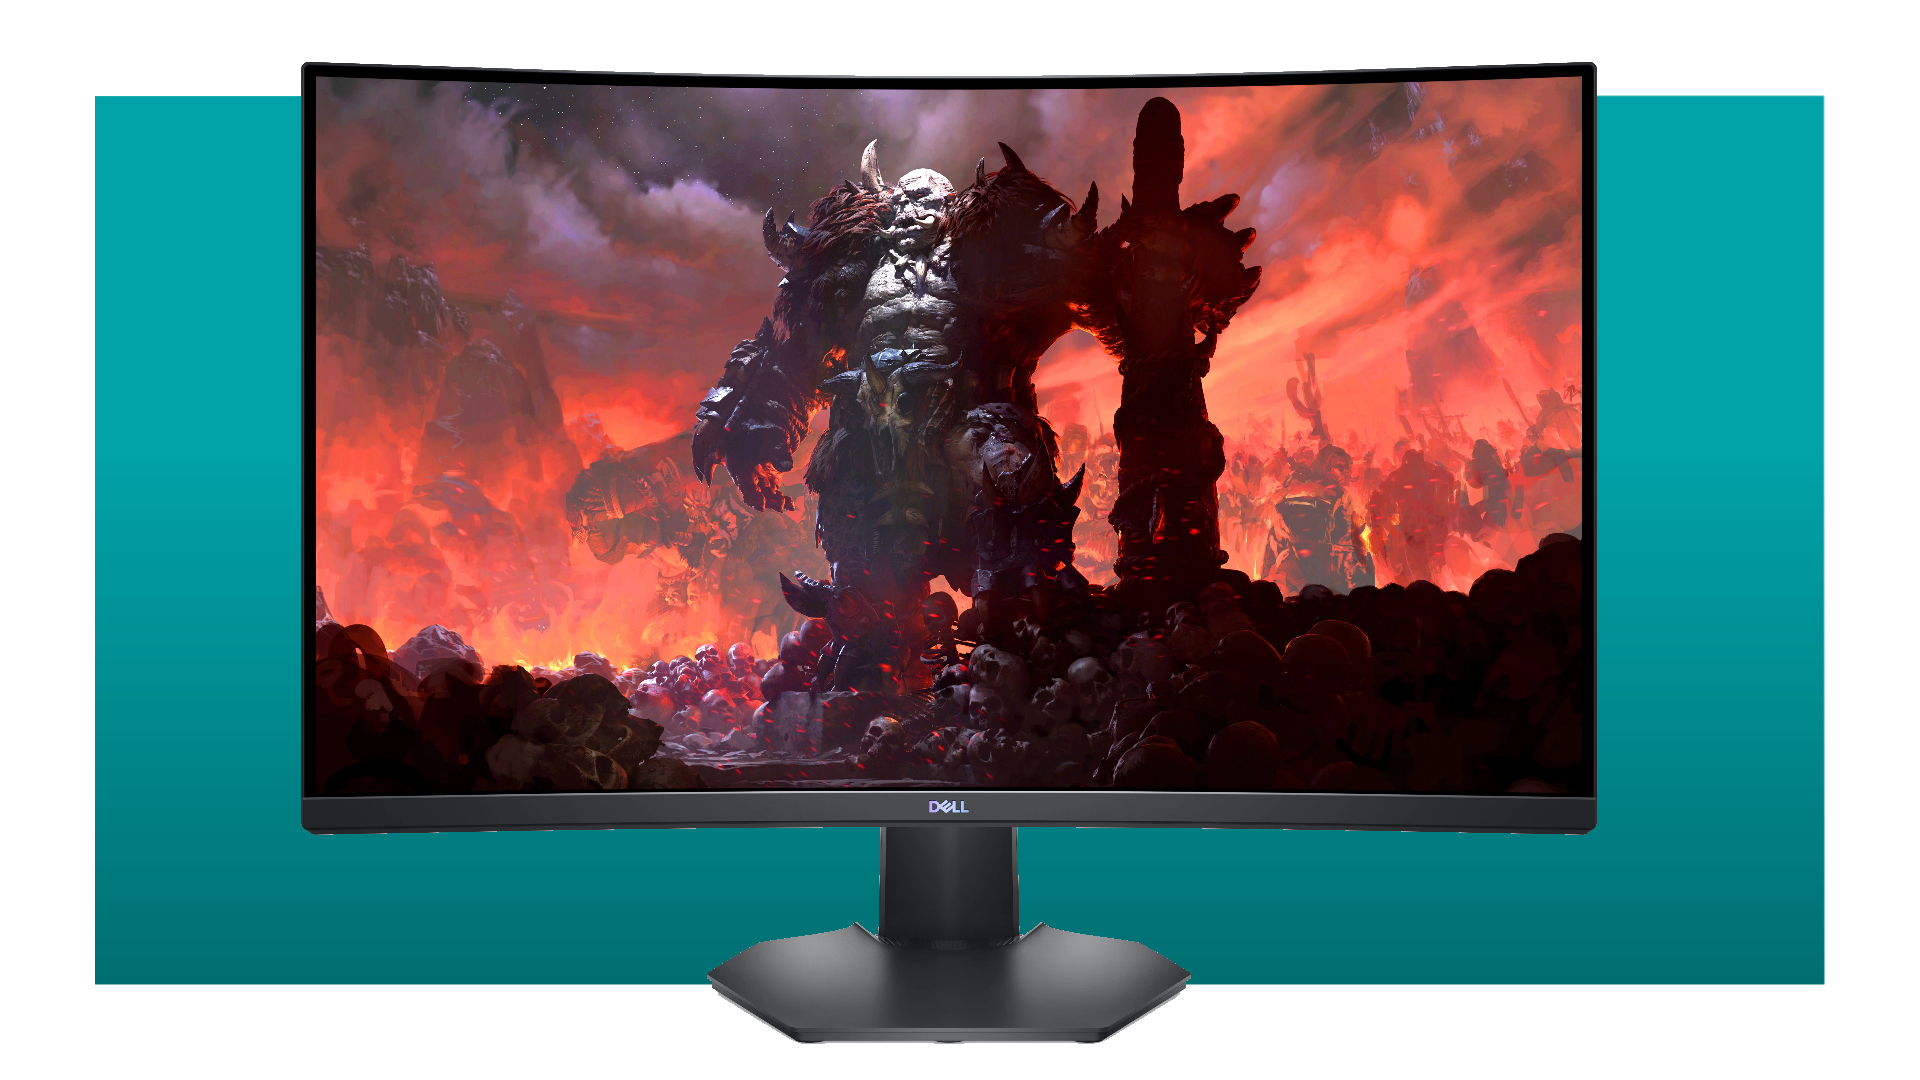  Our favourite 32-inch 1440p gaming monitor is on sale for $300 